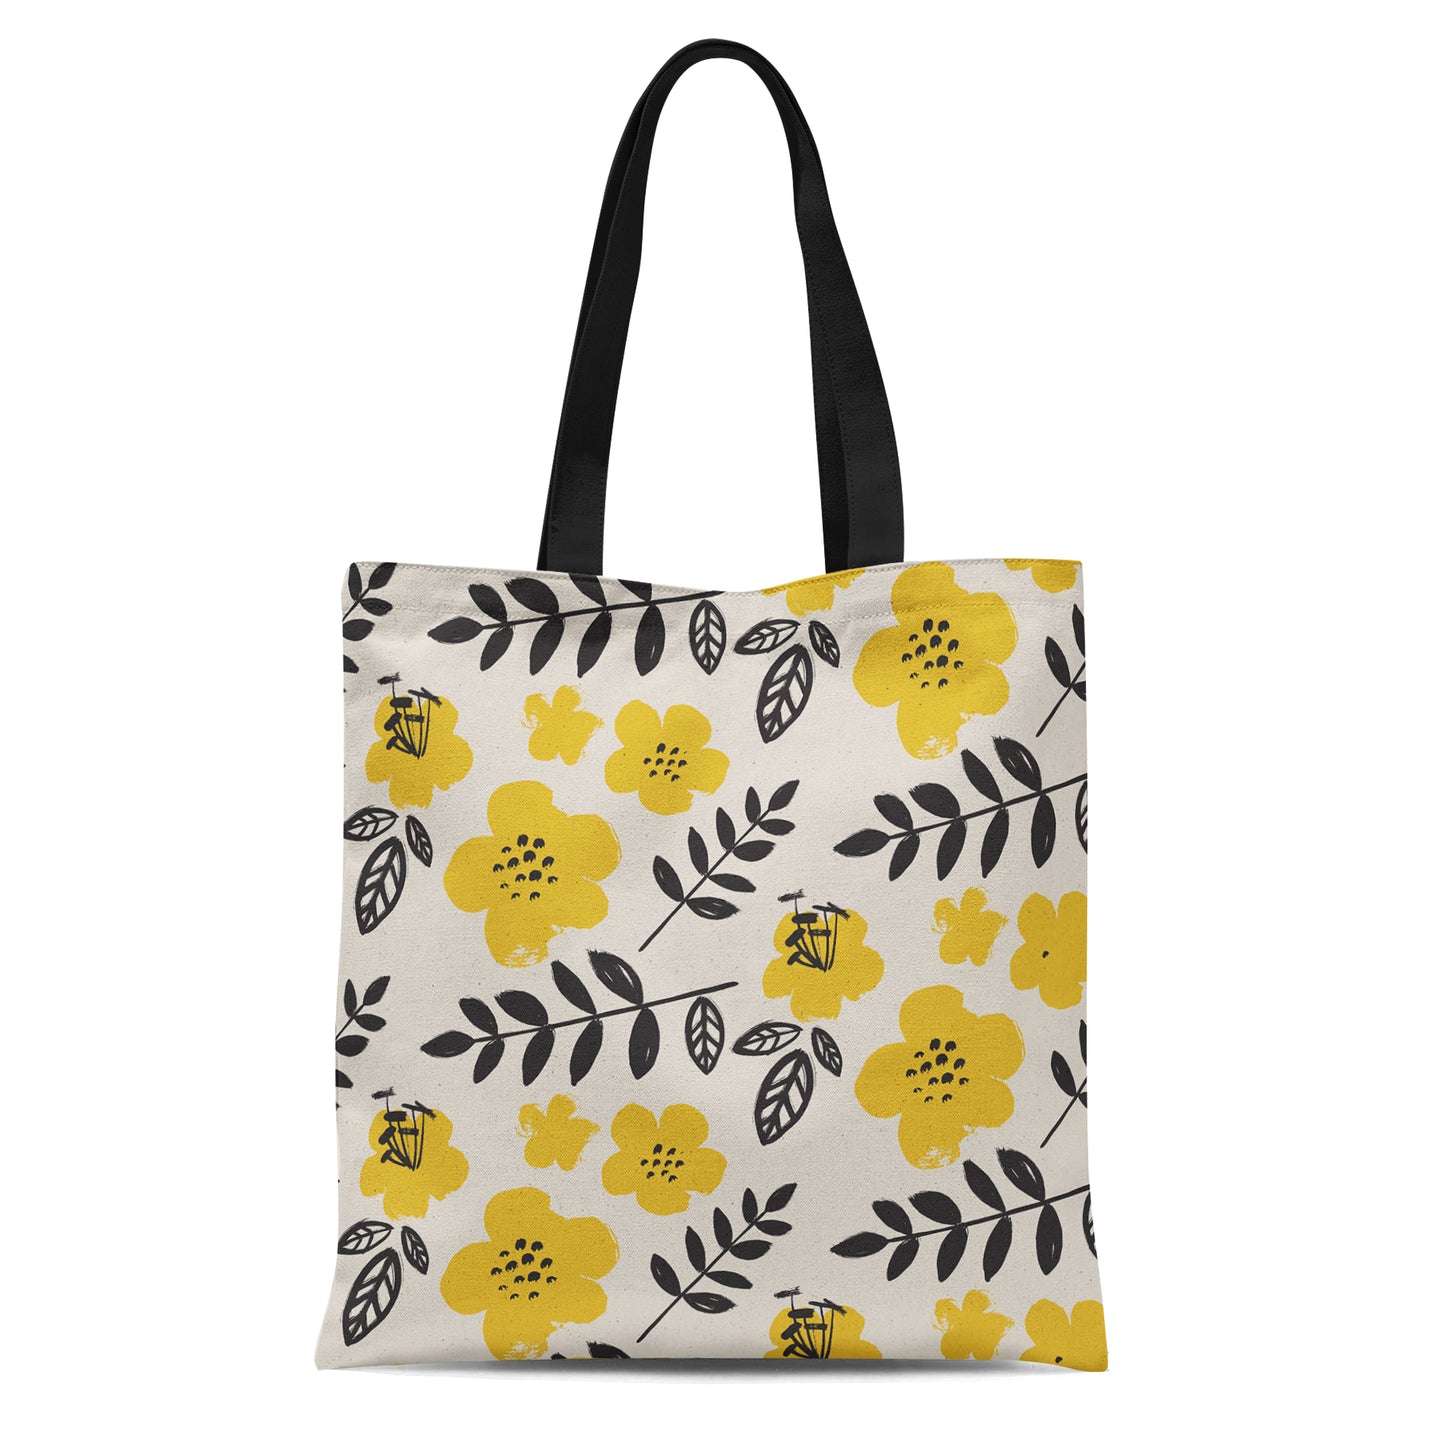 Tote Bag with handdrawn floral pattern